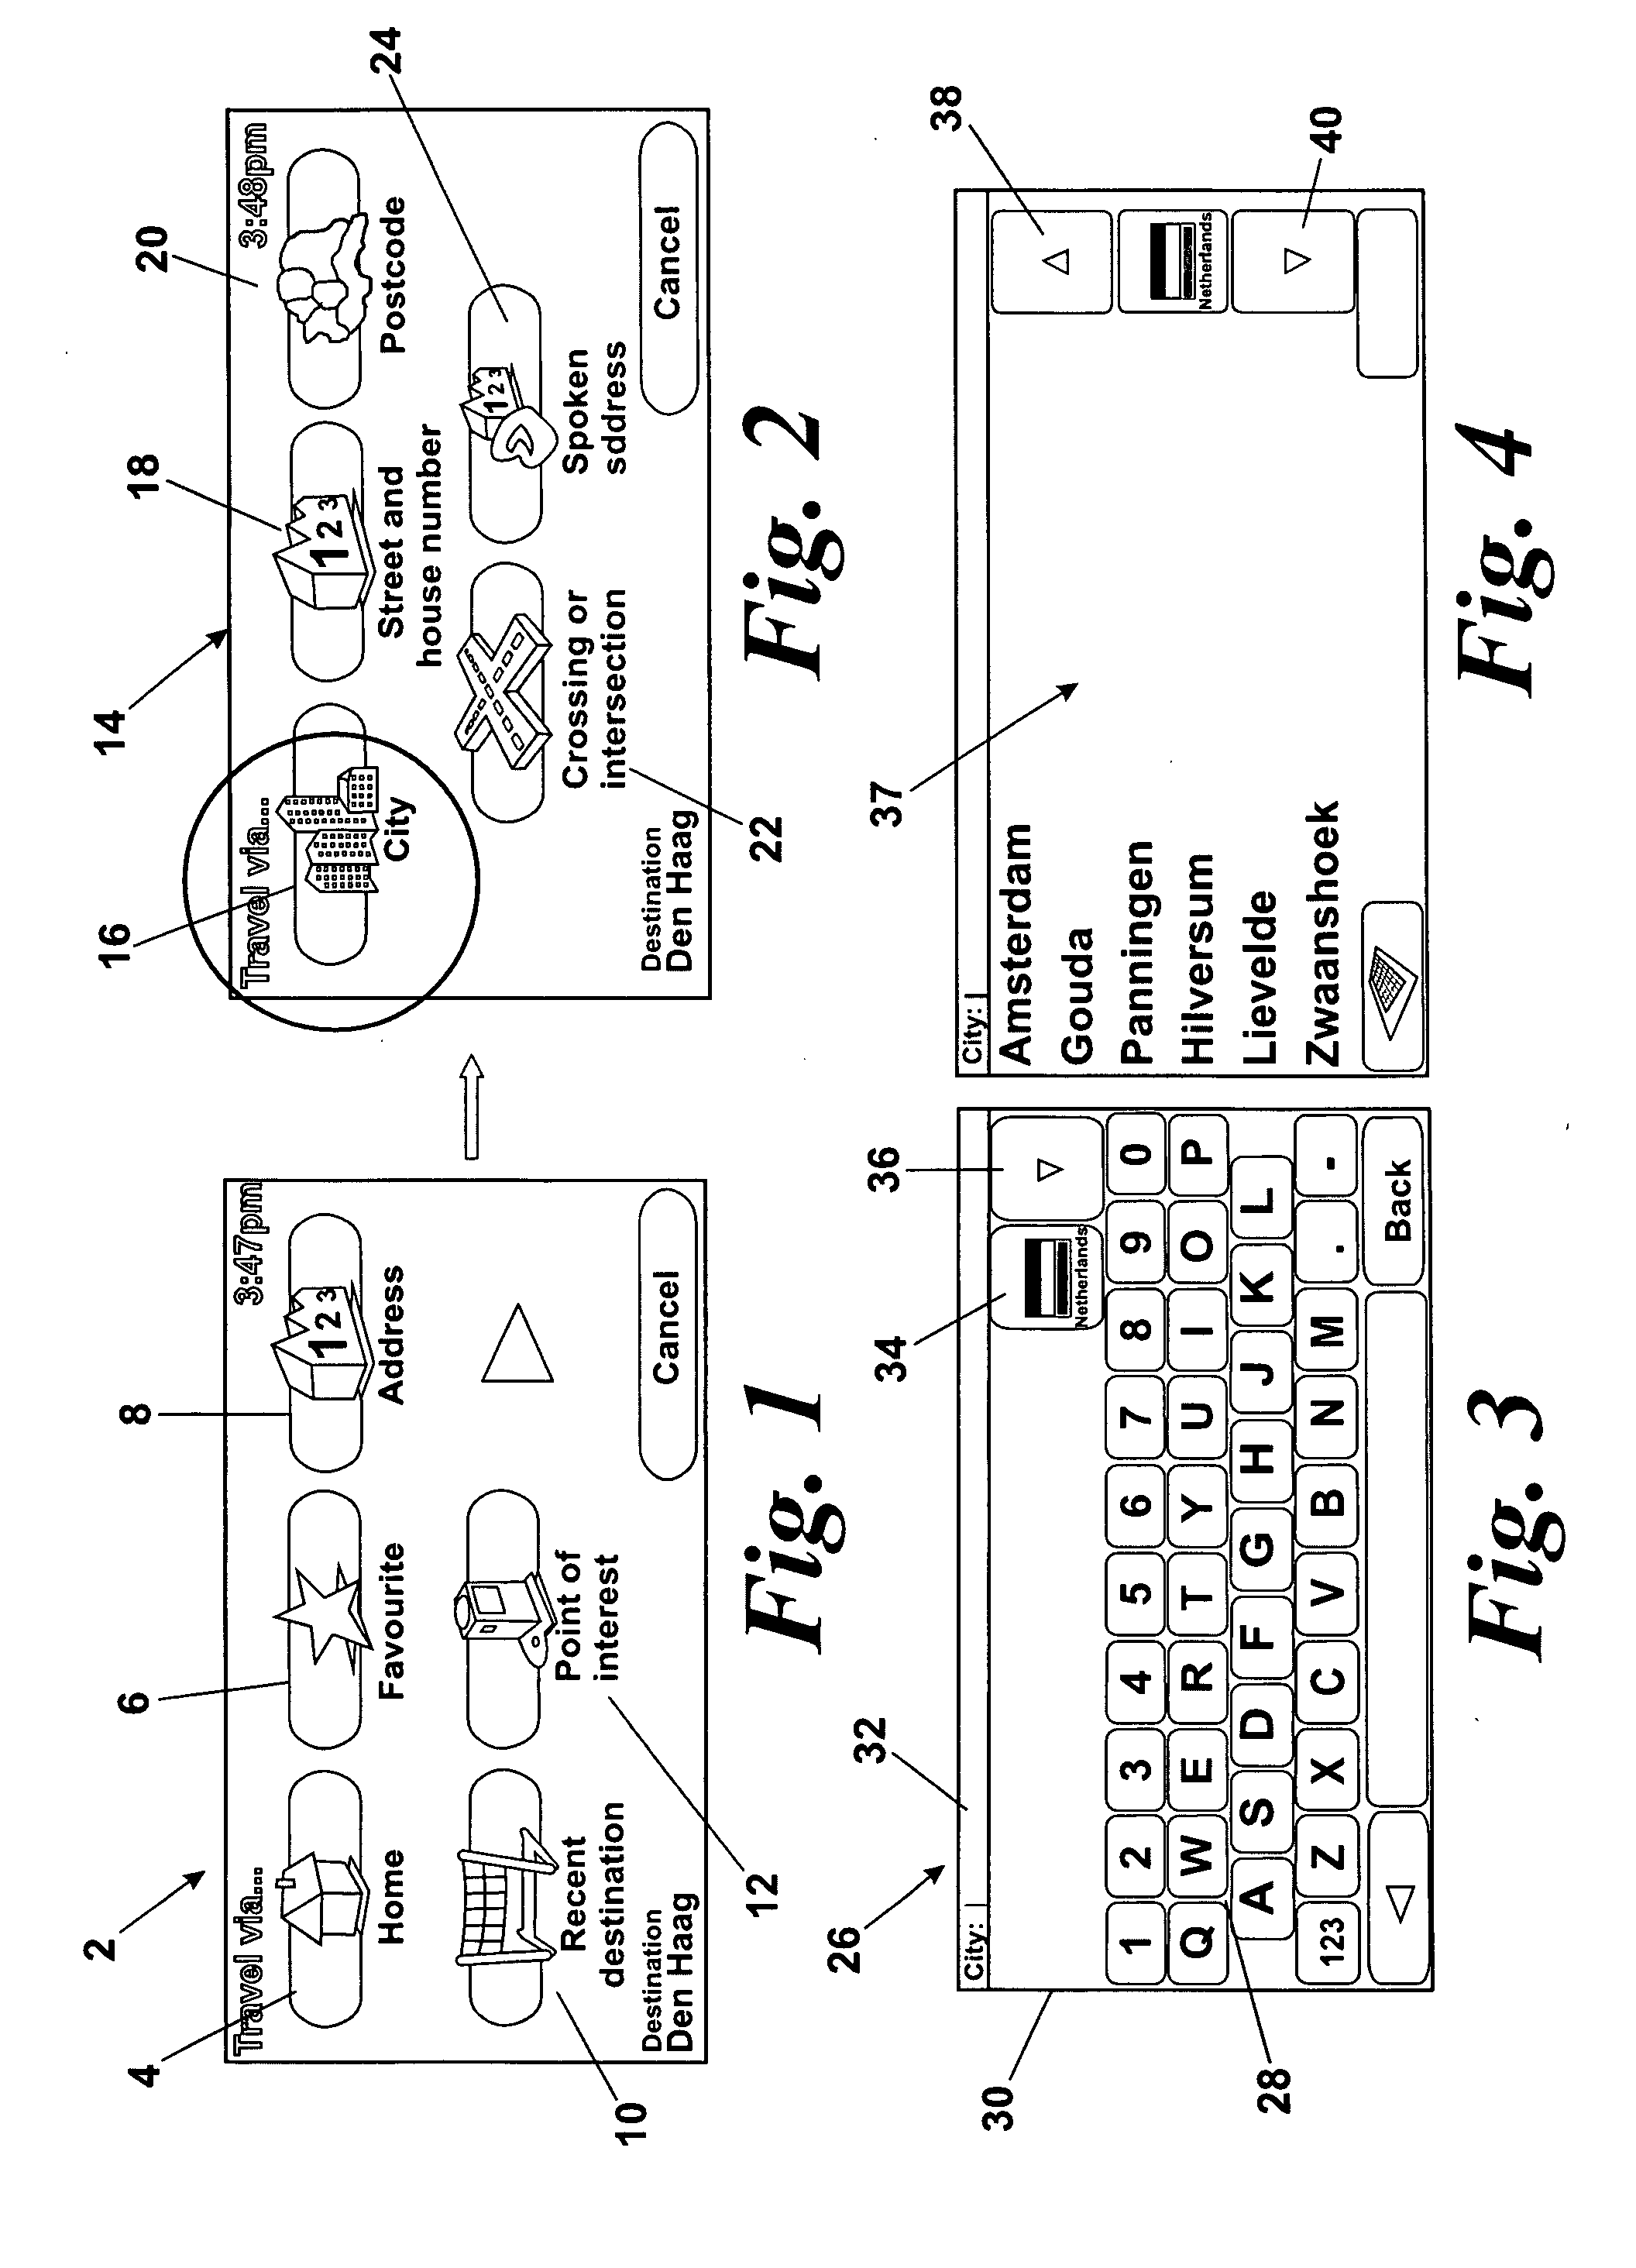 Search function for portable navigation device